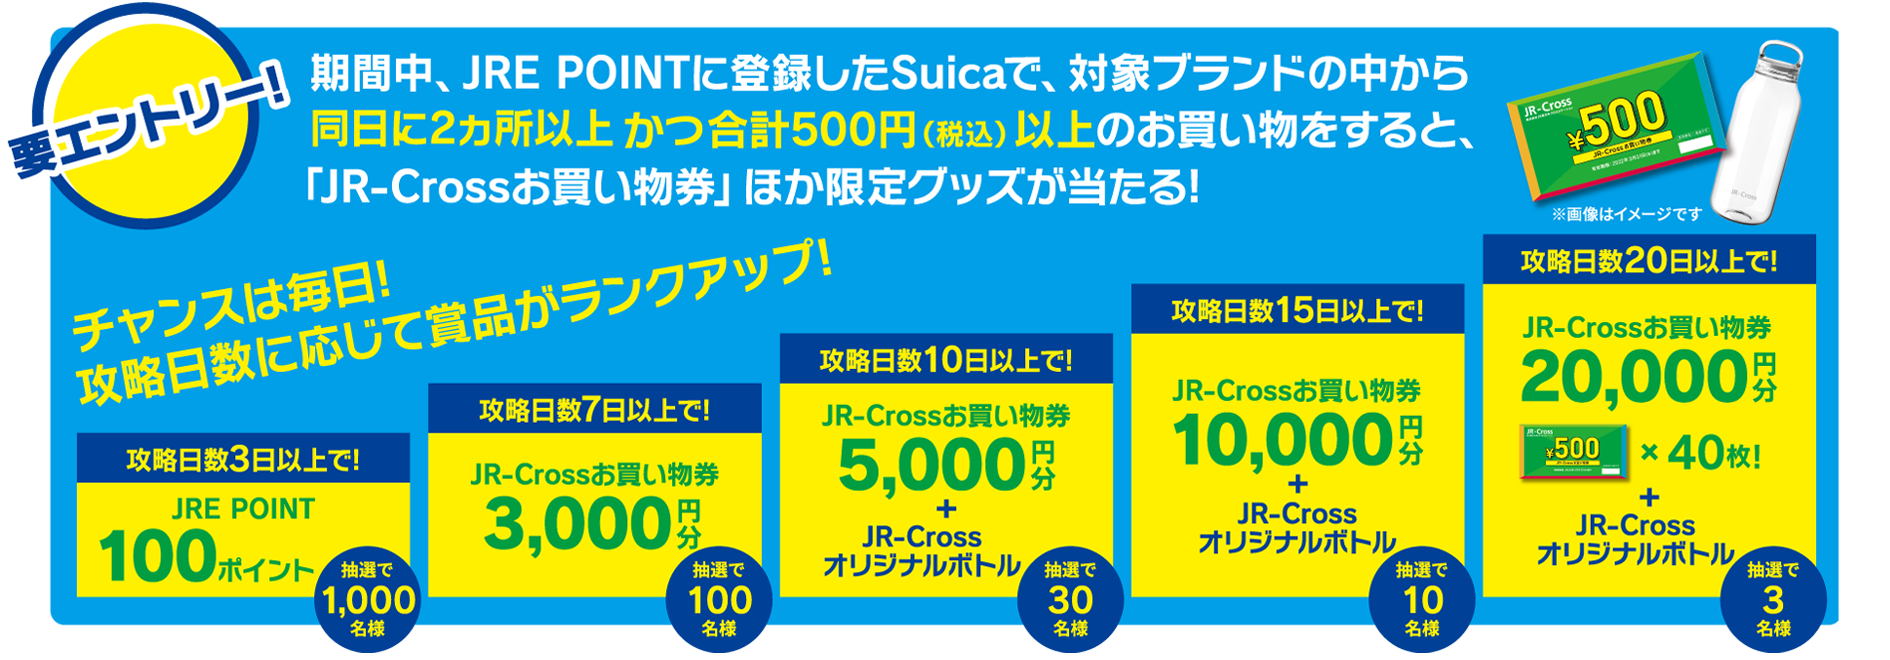 Entry required! During the period, if you shop at 2 or more of the target brands on the same day and total 500 yen (tax included) or more with Suica registered in JRE POINT, you will win [JR-Cross shopping ticket] and other limited goods! Opportunity every day! Prizes will be ranked up according to the number of capture days!